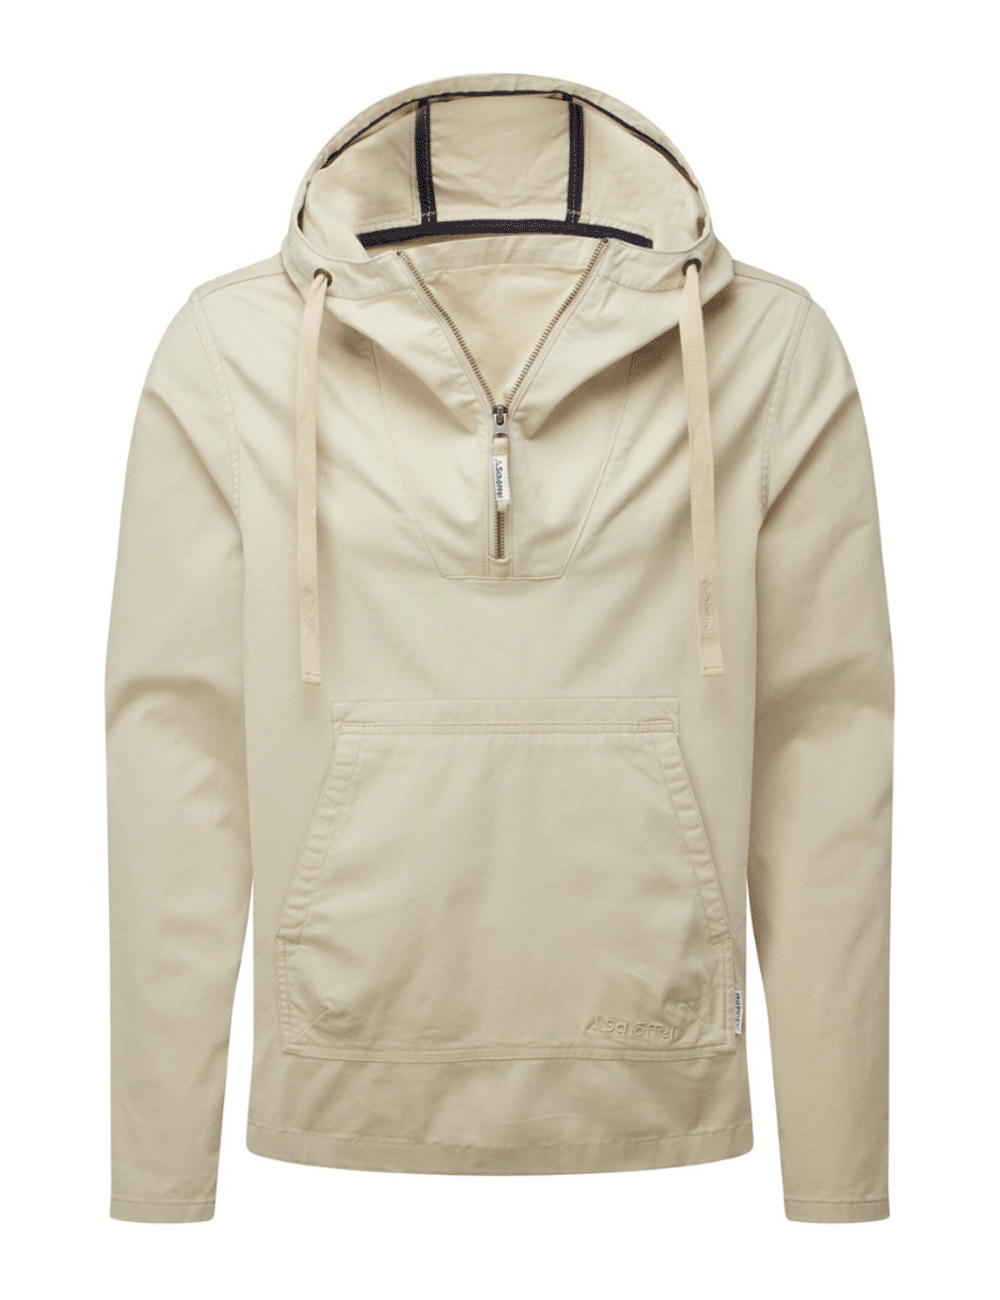 Schoffel's Harbour Smock in Oat on a white background